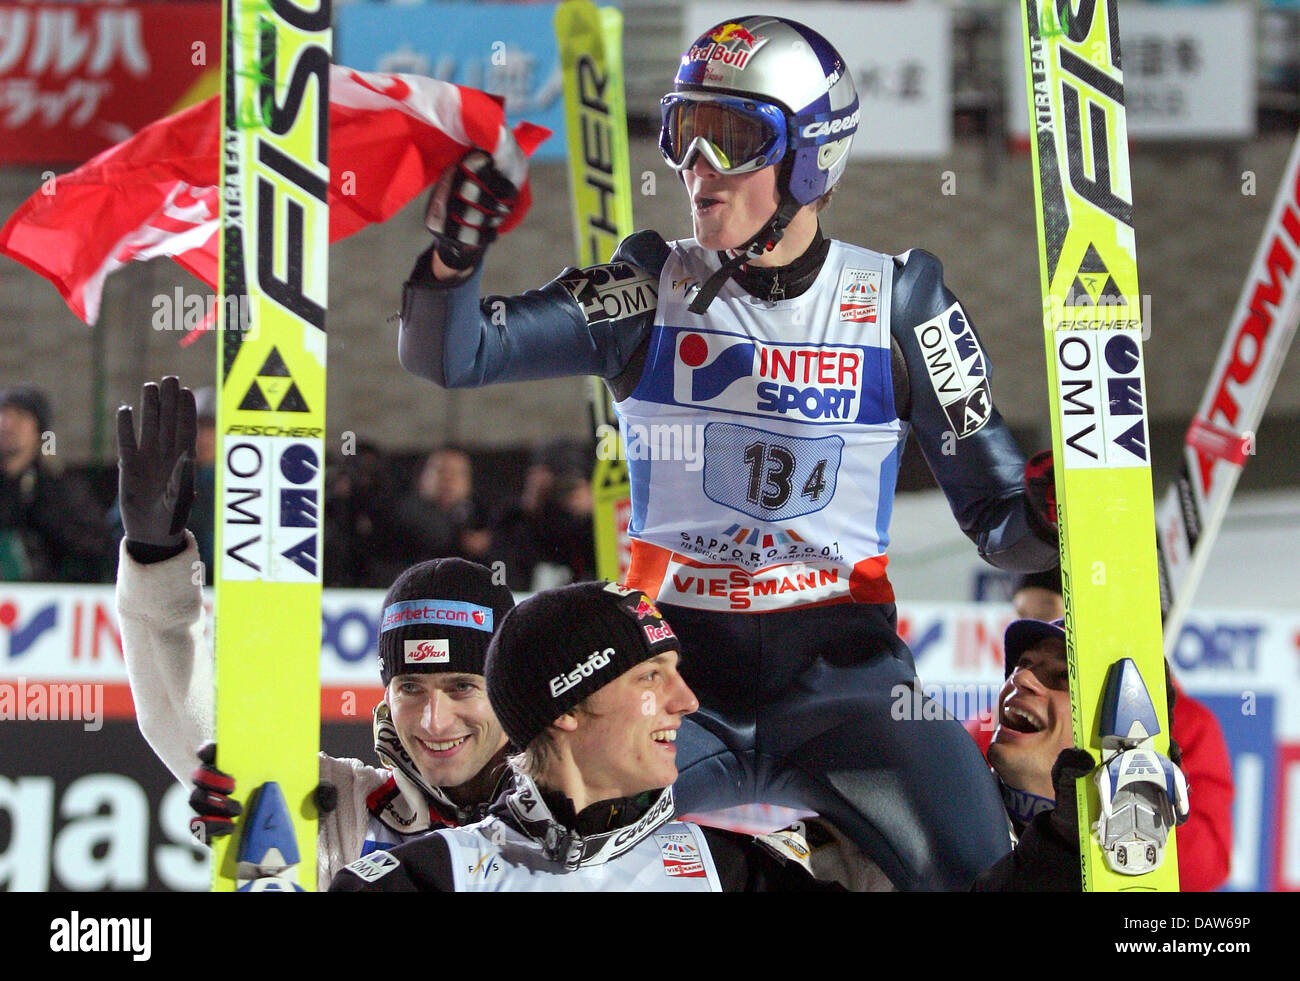 Austrian ski jumper Thomas Morgenstern (top) is cheered by his team-mates (bottom L-R) Wolfgang Loitzl, Gregoer Schlierenzauer and Andreas Kofler for bringing home the Austrian triumph at the Lage Hill Team of the Nordic World Ski Championships in Sapporo, Japan, 25 February 2007. Austria finished with a massive total of 1,000.2 points outclassing second placed Norway and suprise t Stock Photo